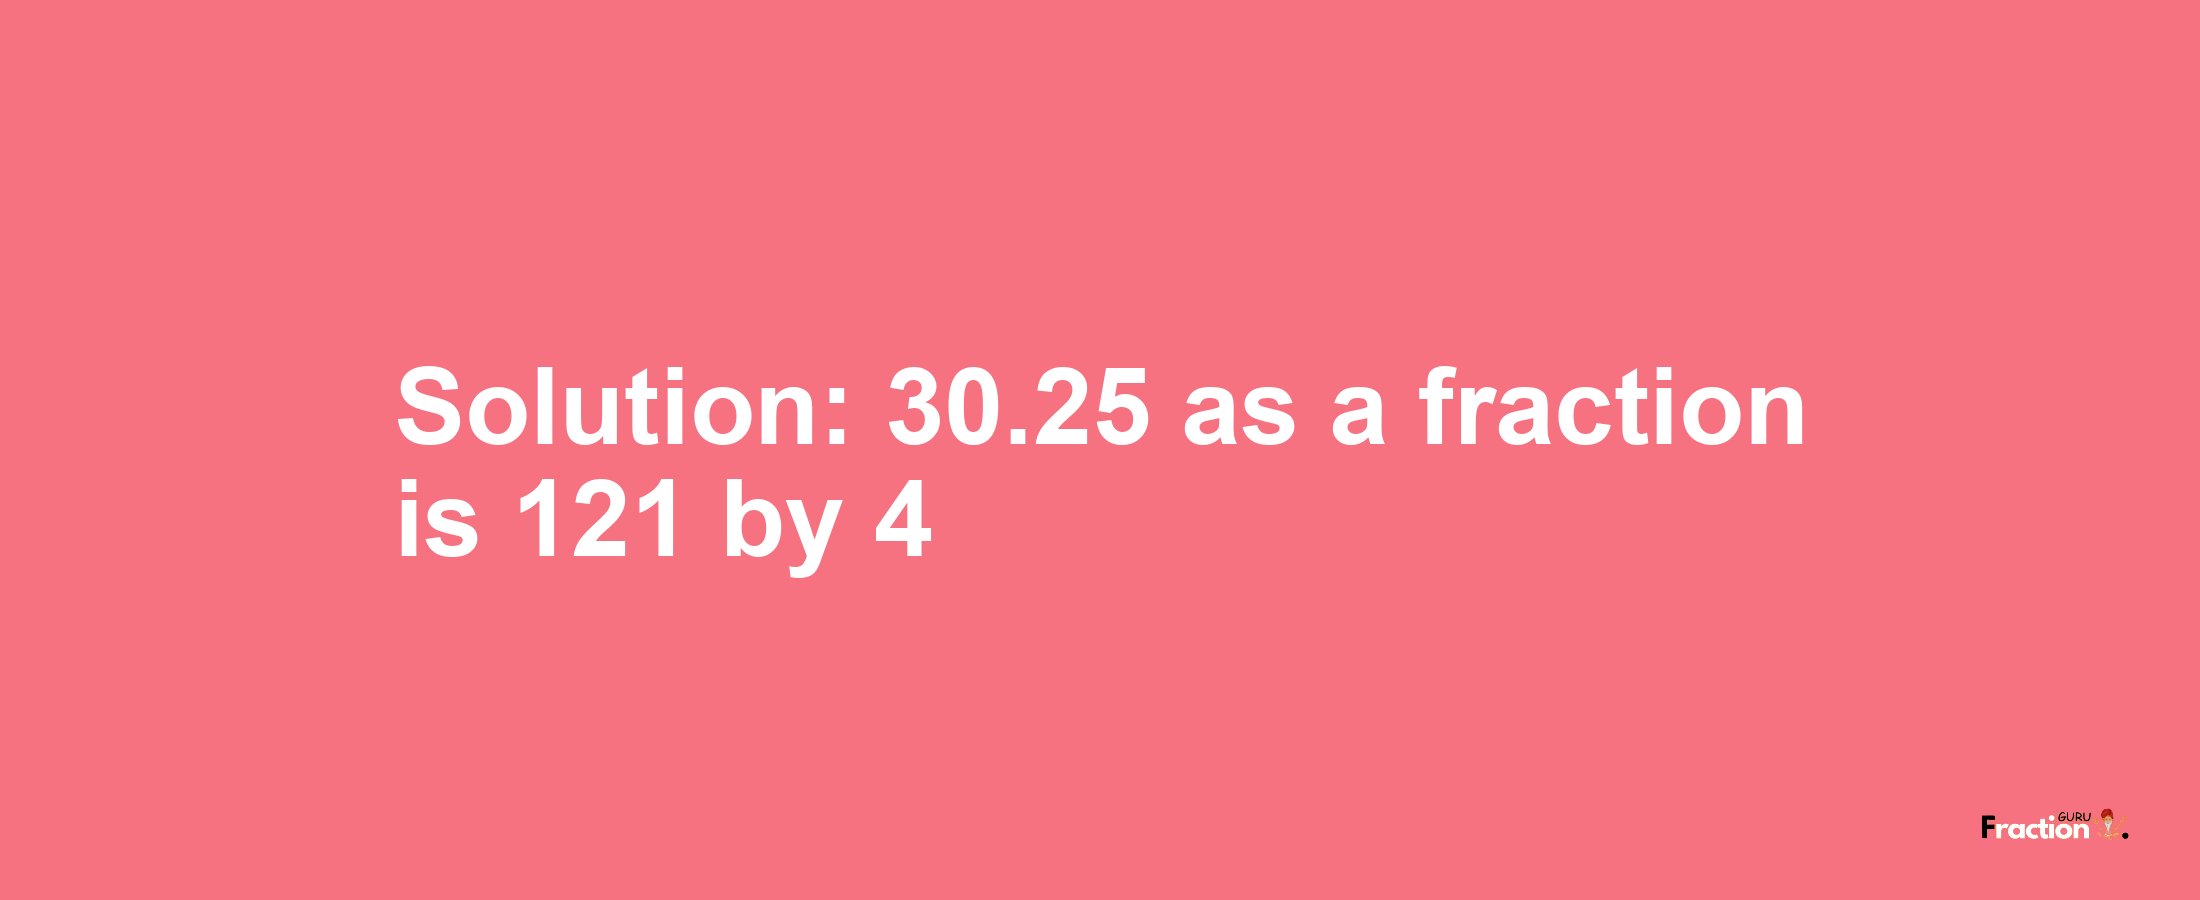 Solution:30.25 as a fraction is 121/4